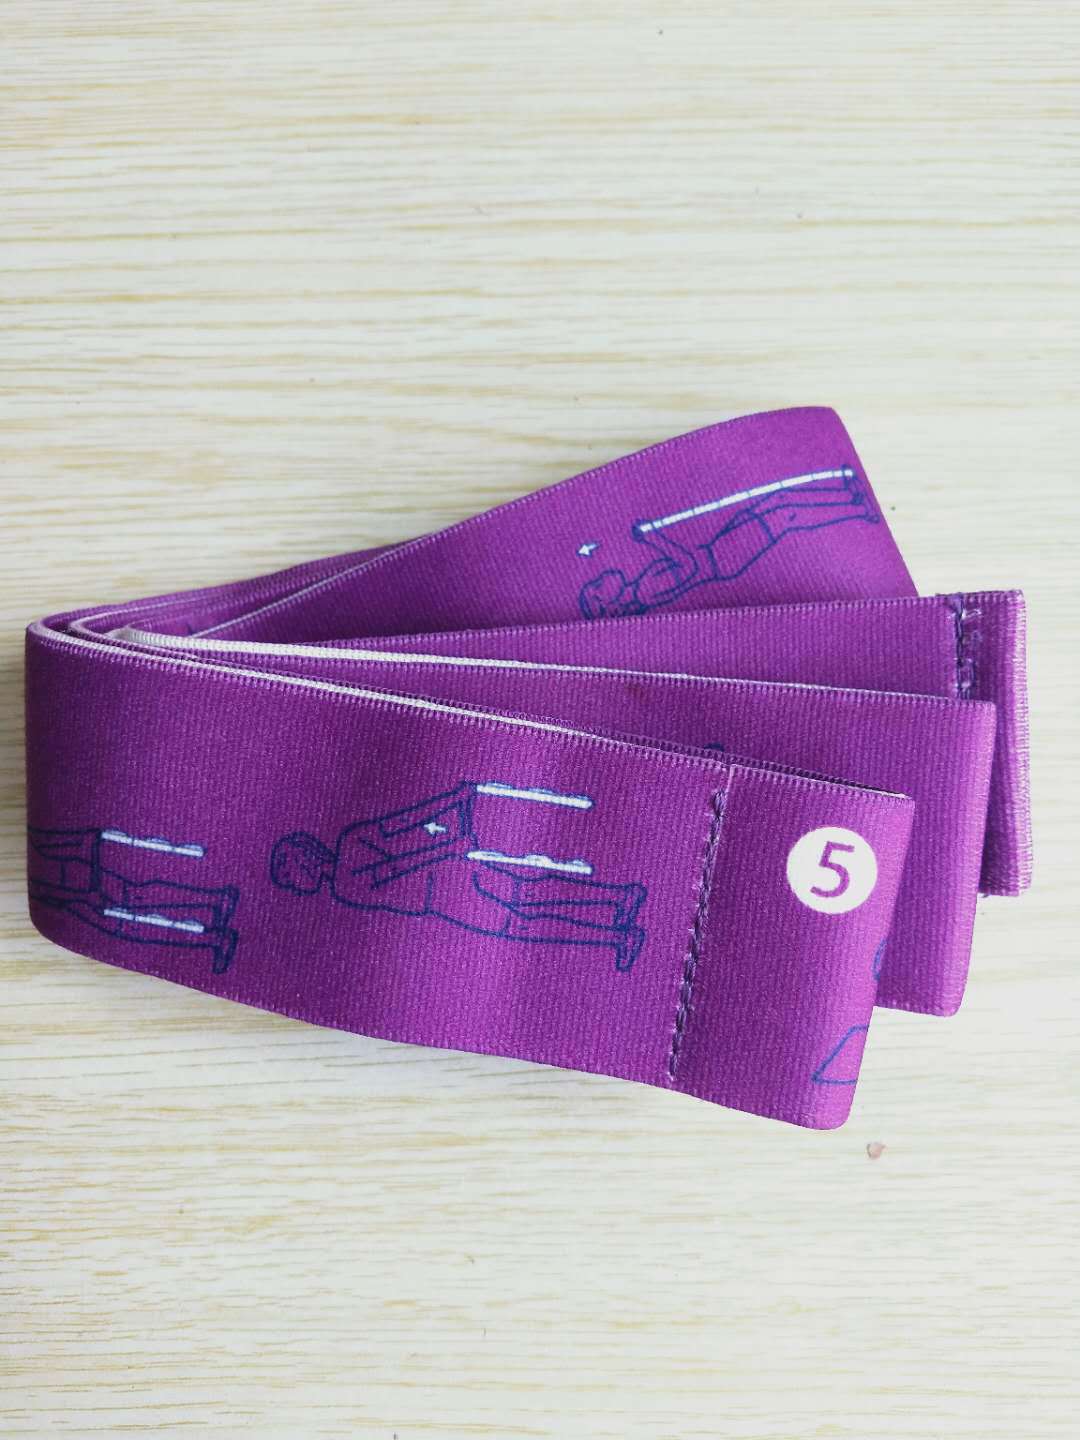 Yoga Stretch Bands Stretch Bands For Resistance Training Purple